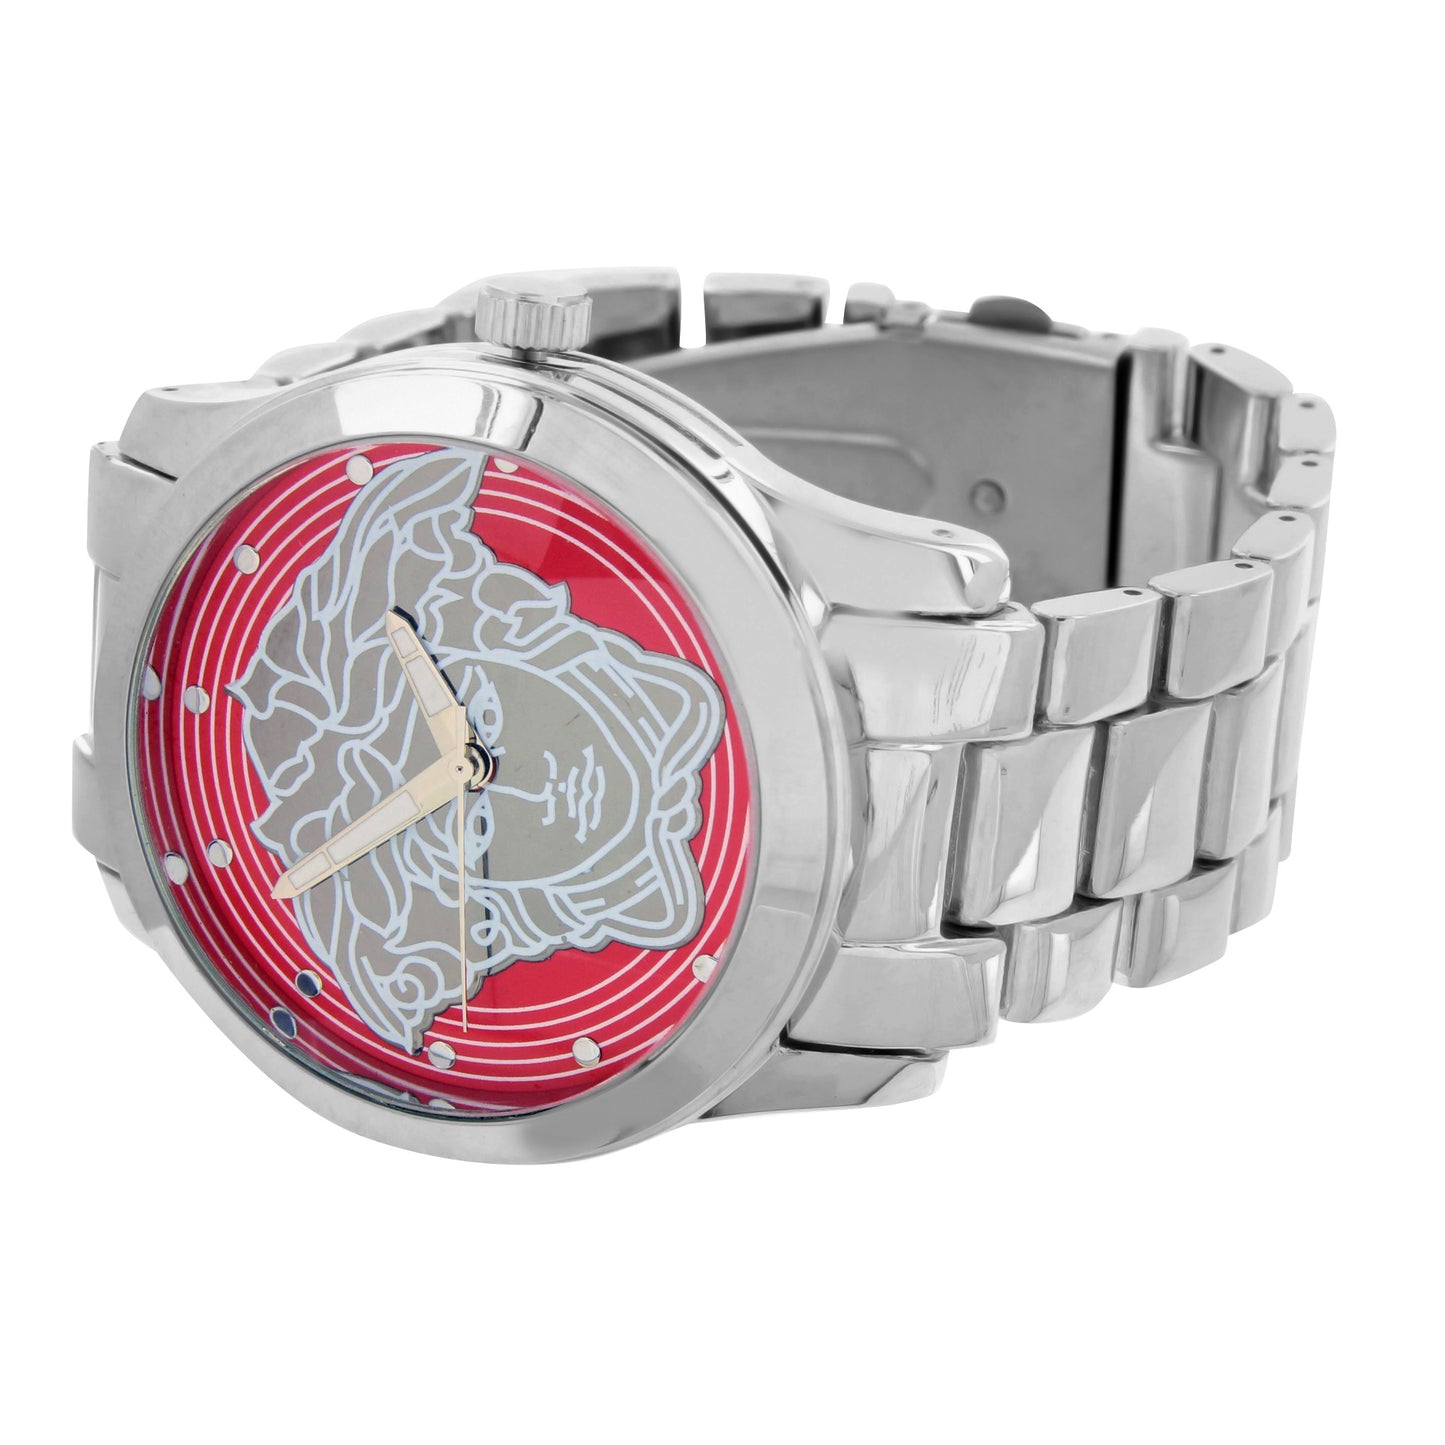 Medusa Watches Red Dial White Finish Water Resistant